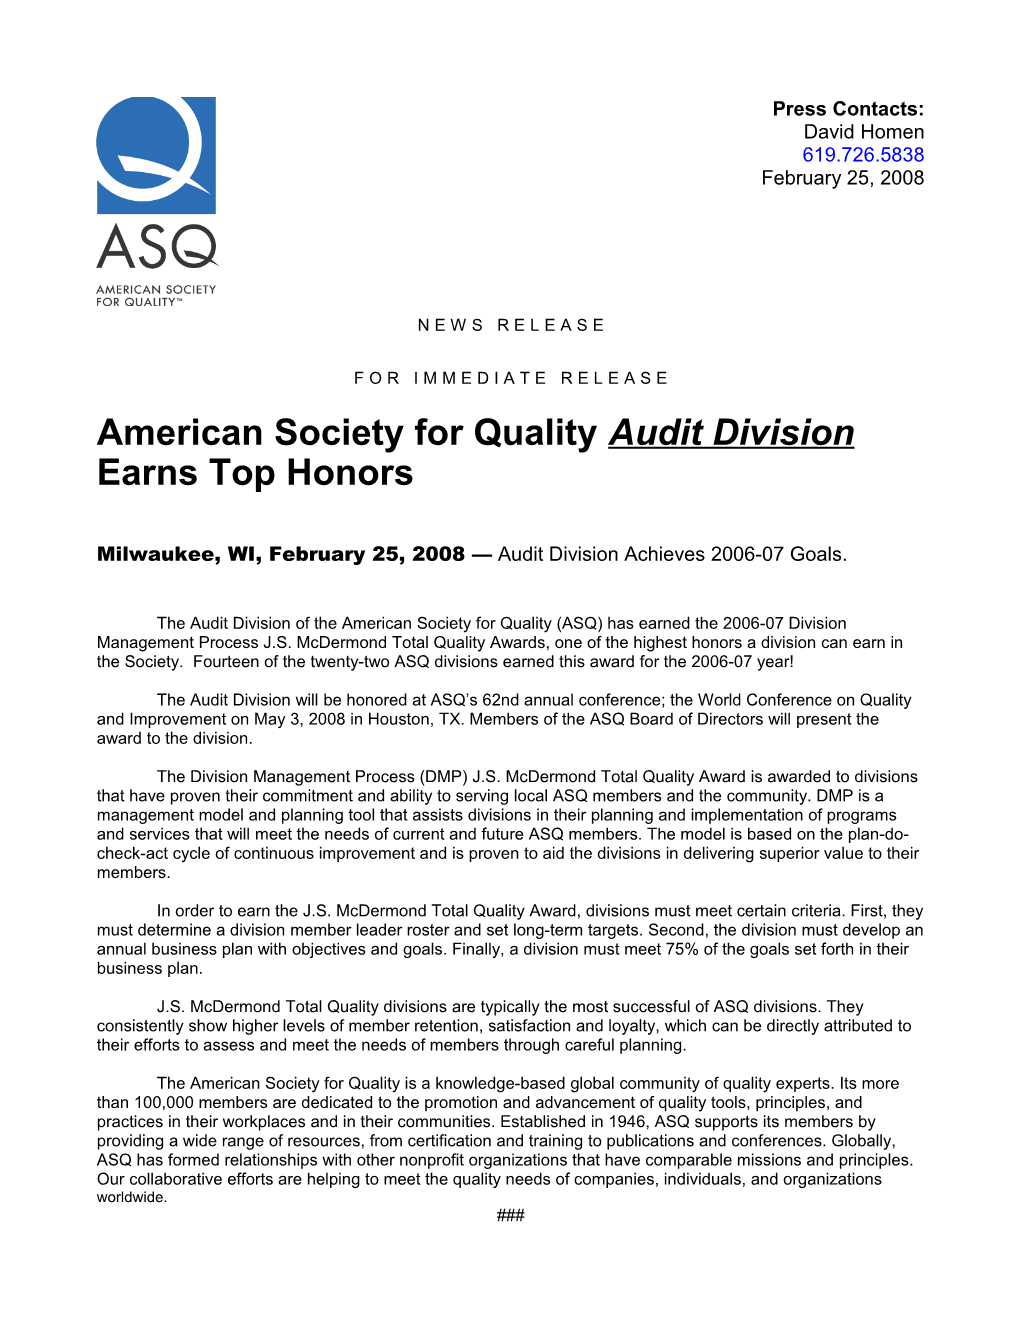 American Society for Quality Audit Division Earns Top Honors